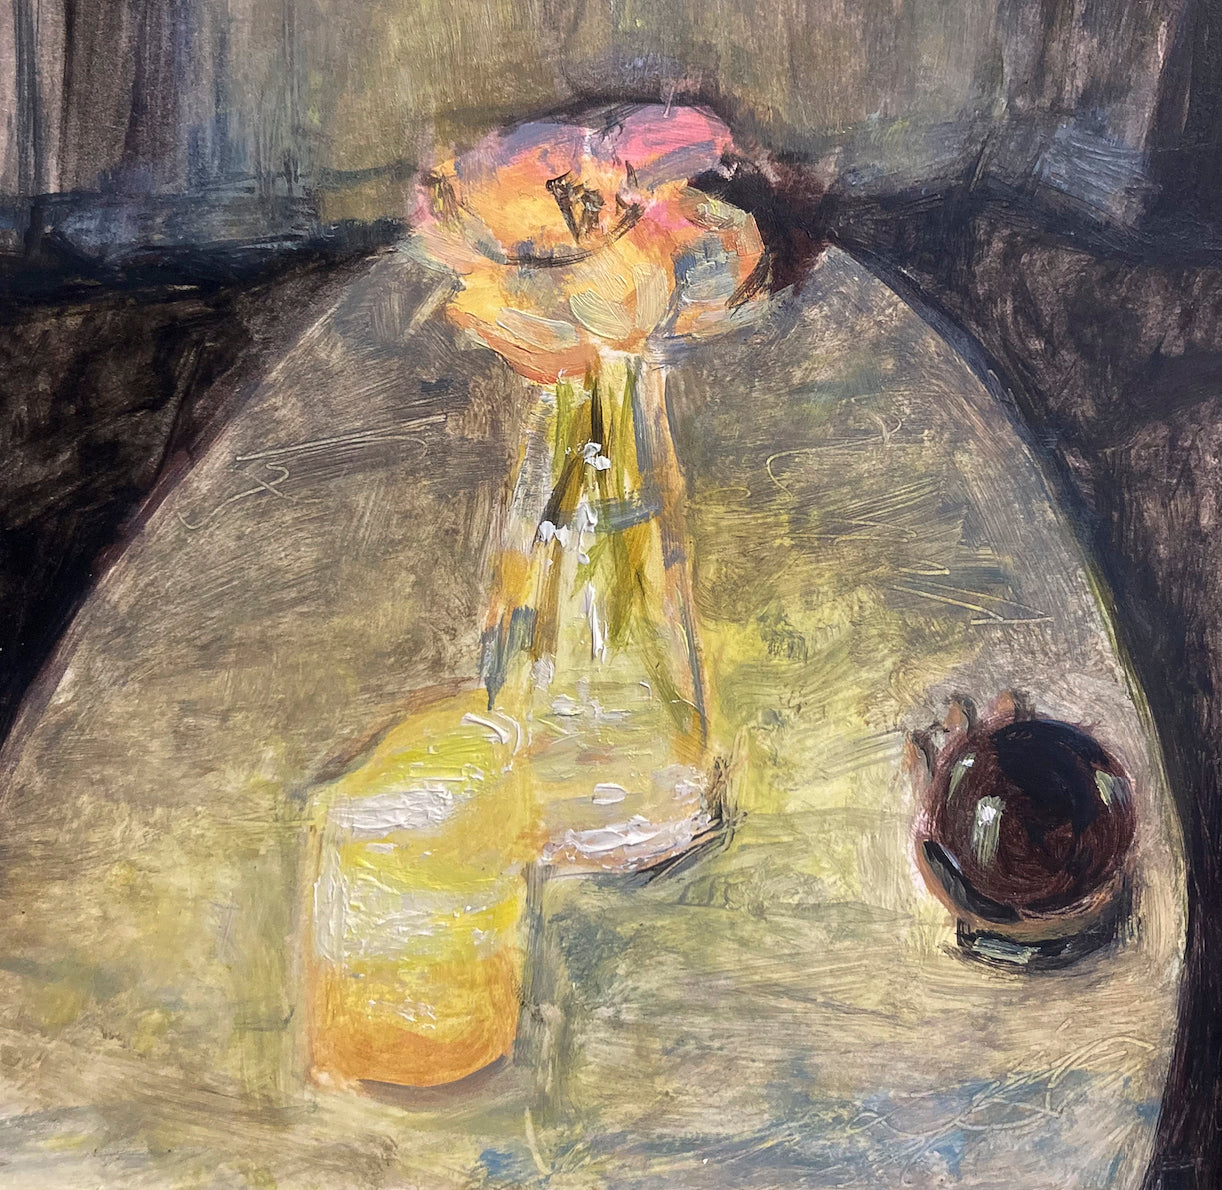 Oil painting of flowers in vase and drinks on table in yellow and gray shades titled 'Low Light' by E. E. Jacks